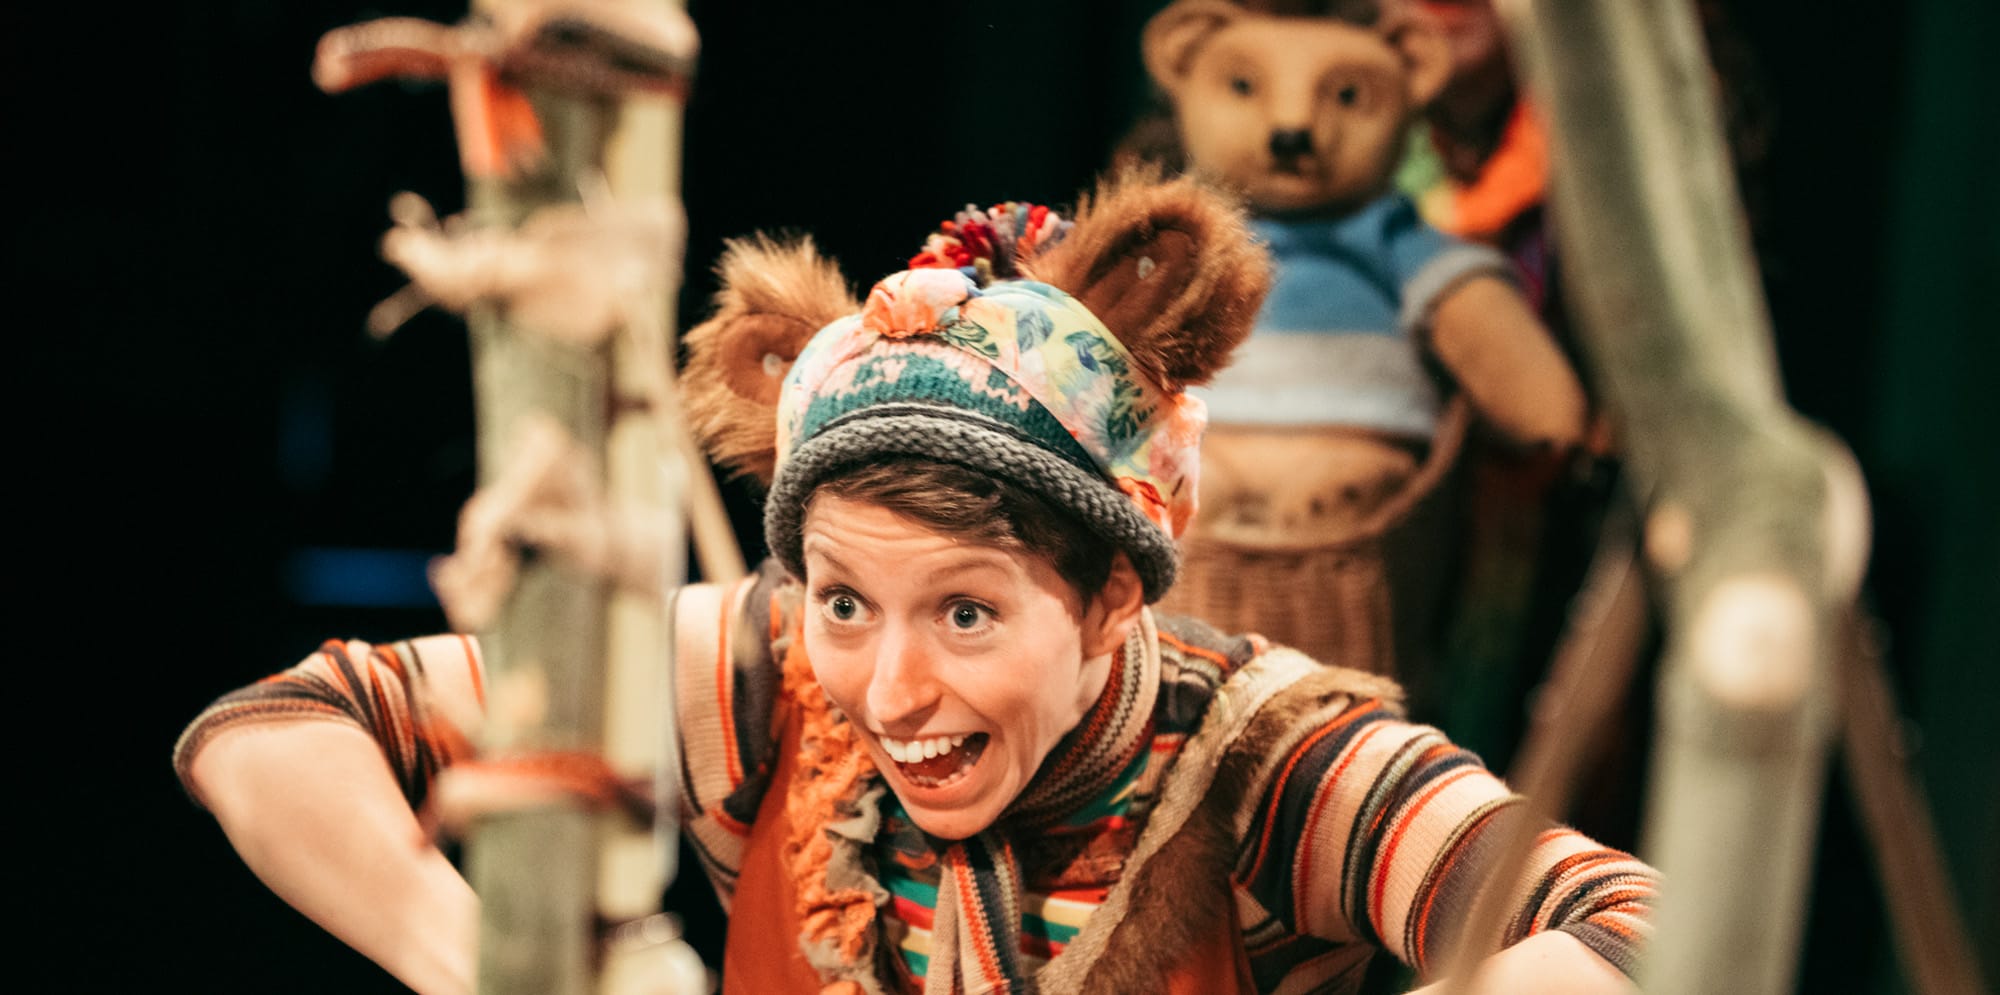 Performer wears fuzzy bear ears attached to a woolly hat, with a stripy shirt, scarf and furry collar. She has a big, wide-mouthed smile. Behind her, out of focus, a bear teddy is visible.